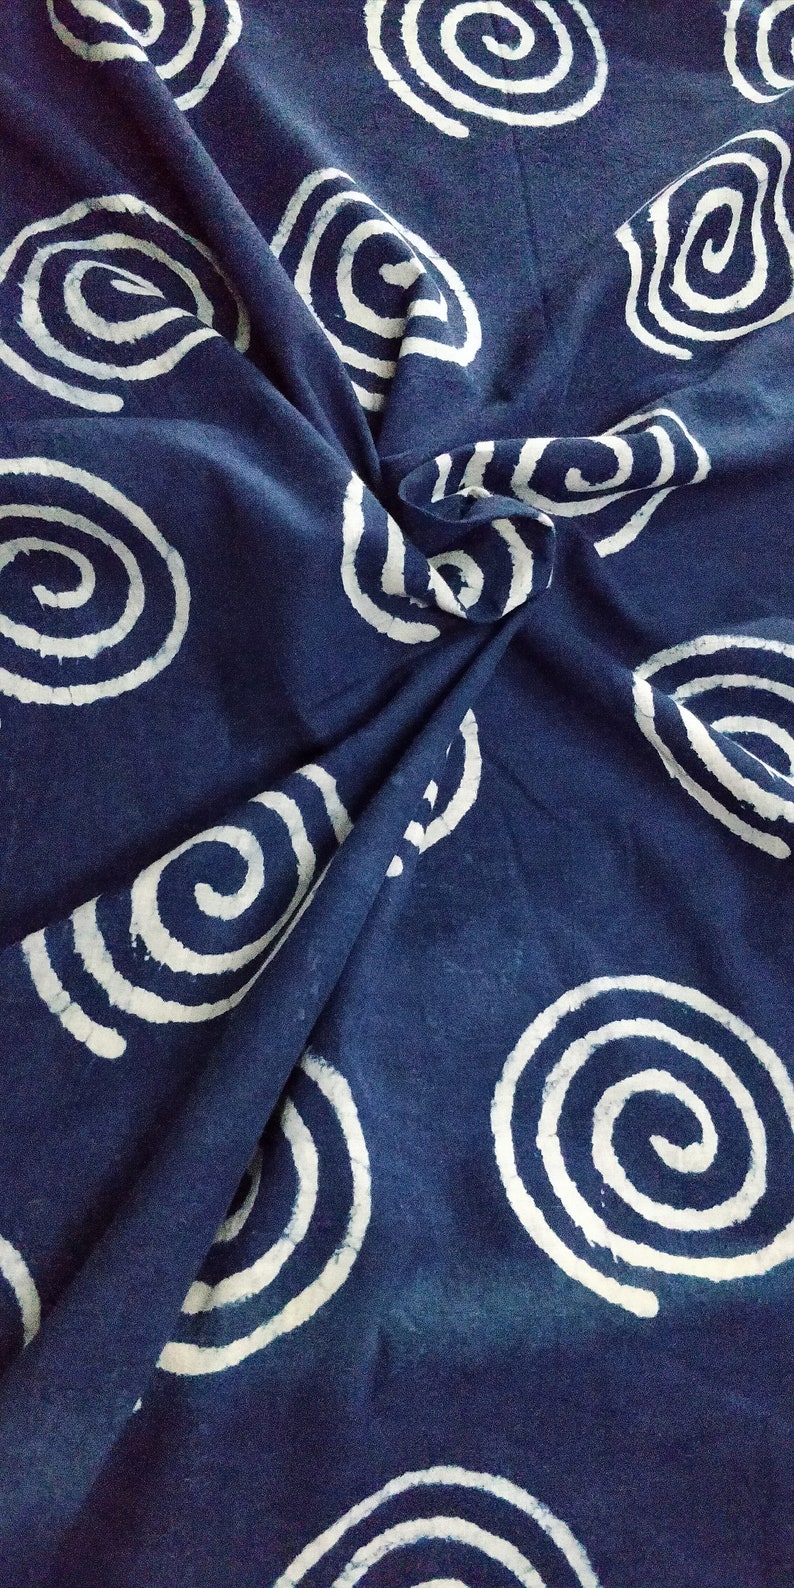 By The Yard Indigo Blue Bird Print Cotton Fabric dress,Table cloth curtains fabric Indian Hand Block Printed Natural Vegetable Dye Fabric